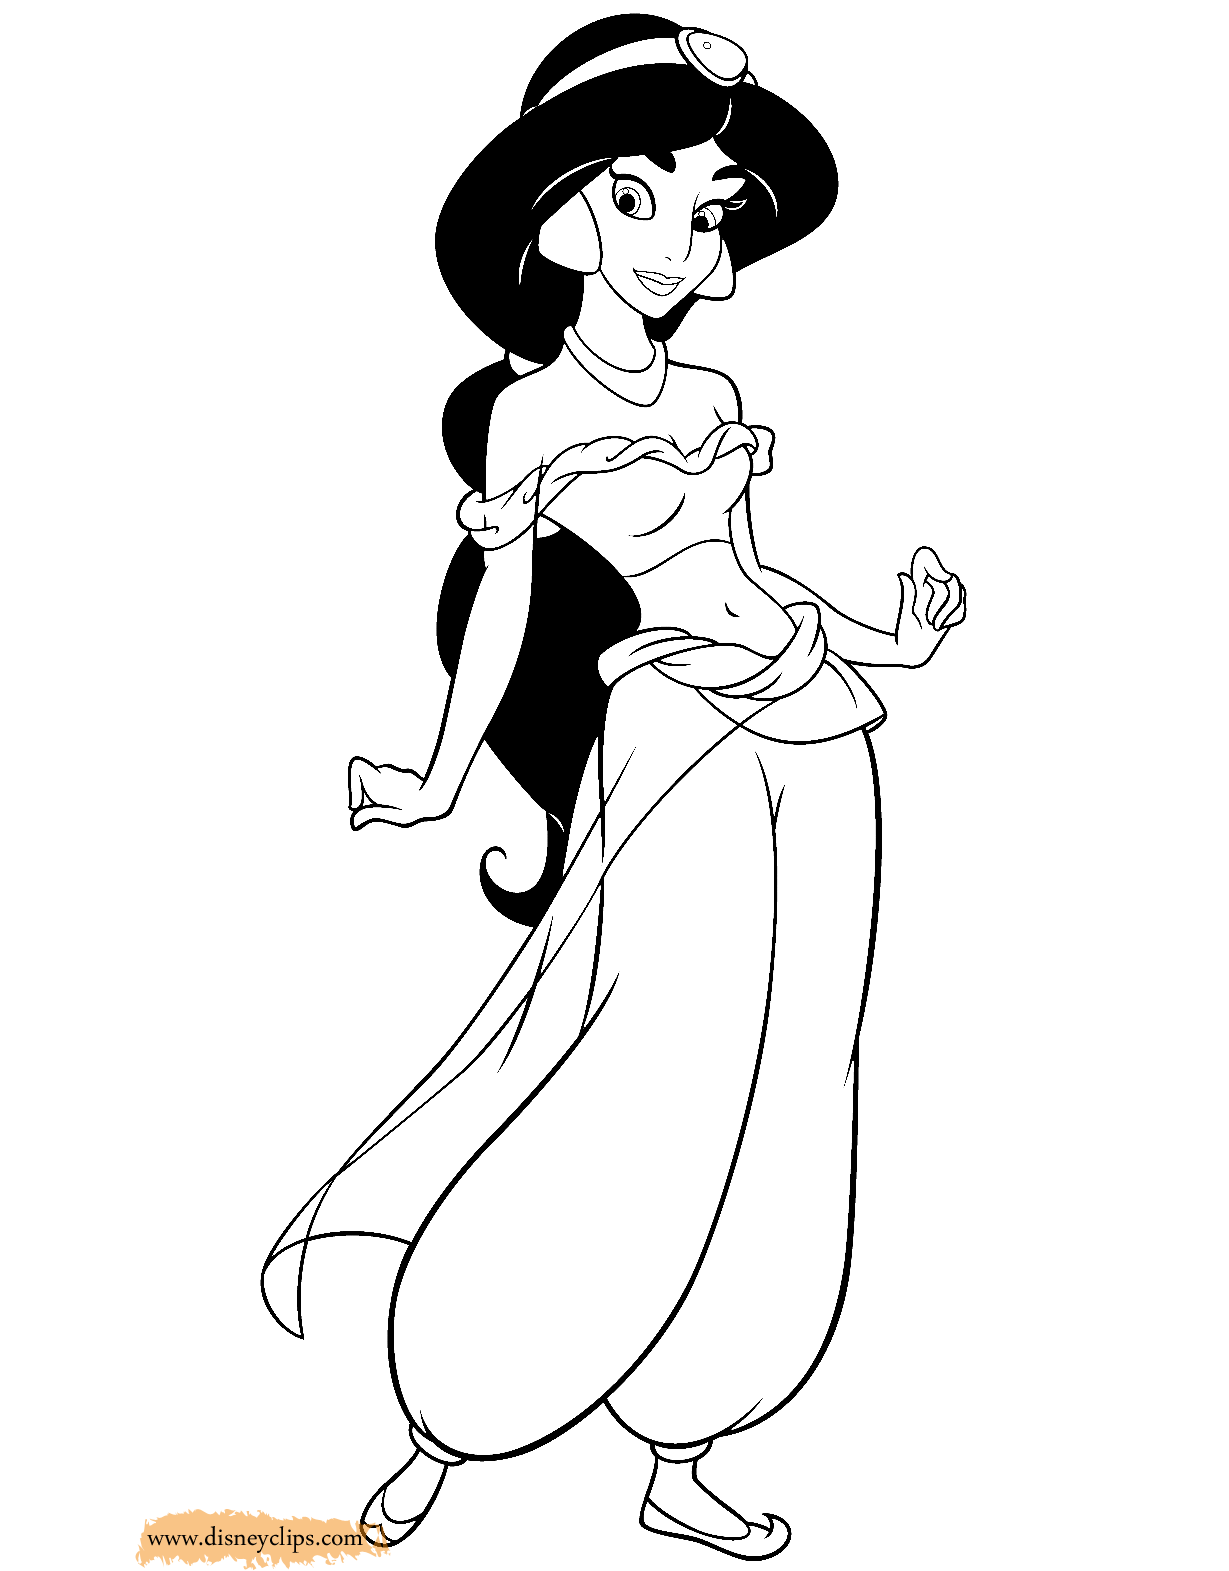 Download Jasmin - Free Colouring Pages